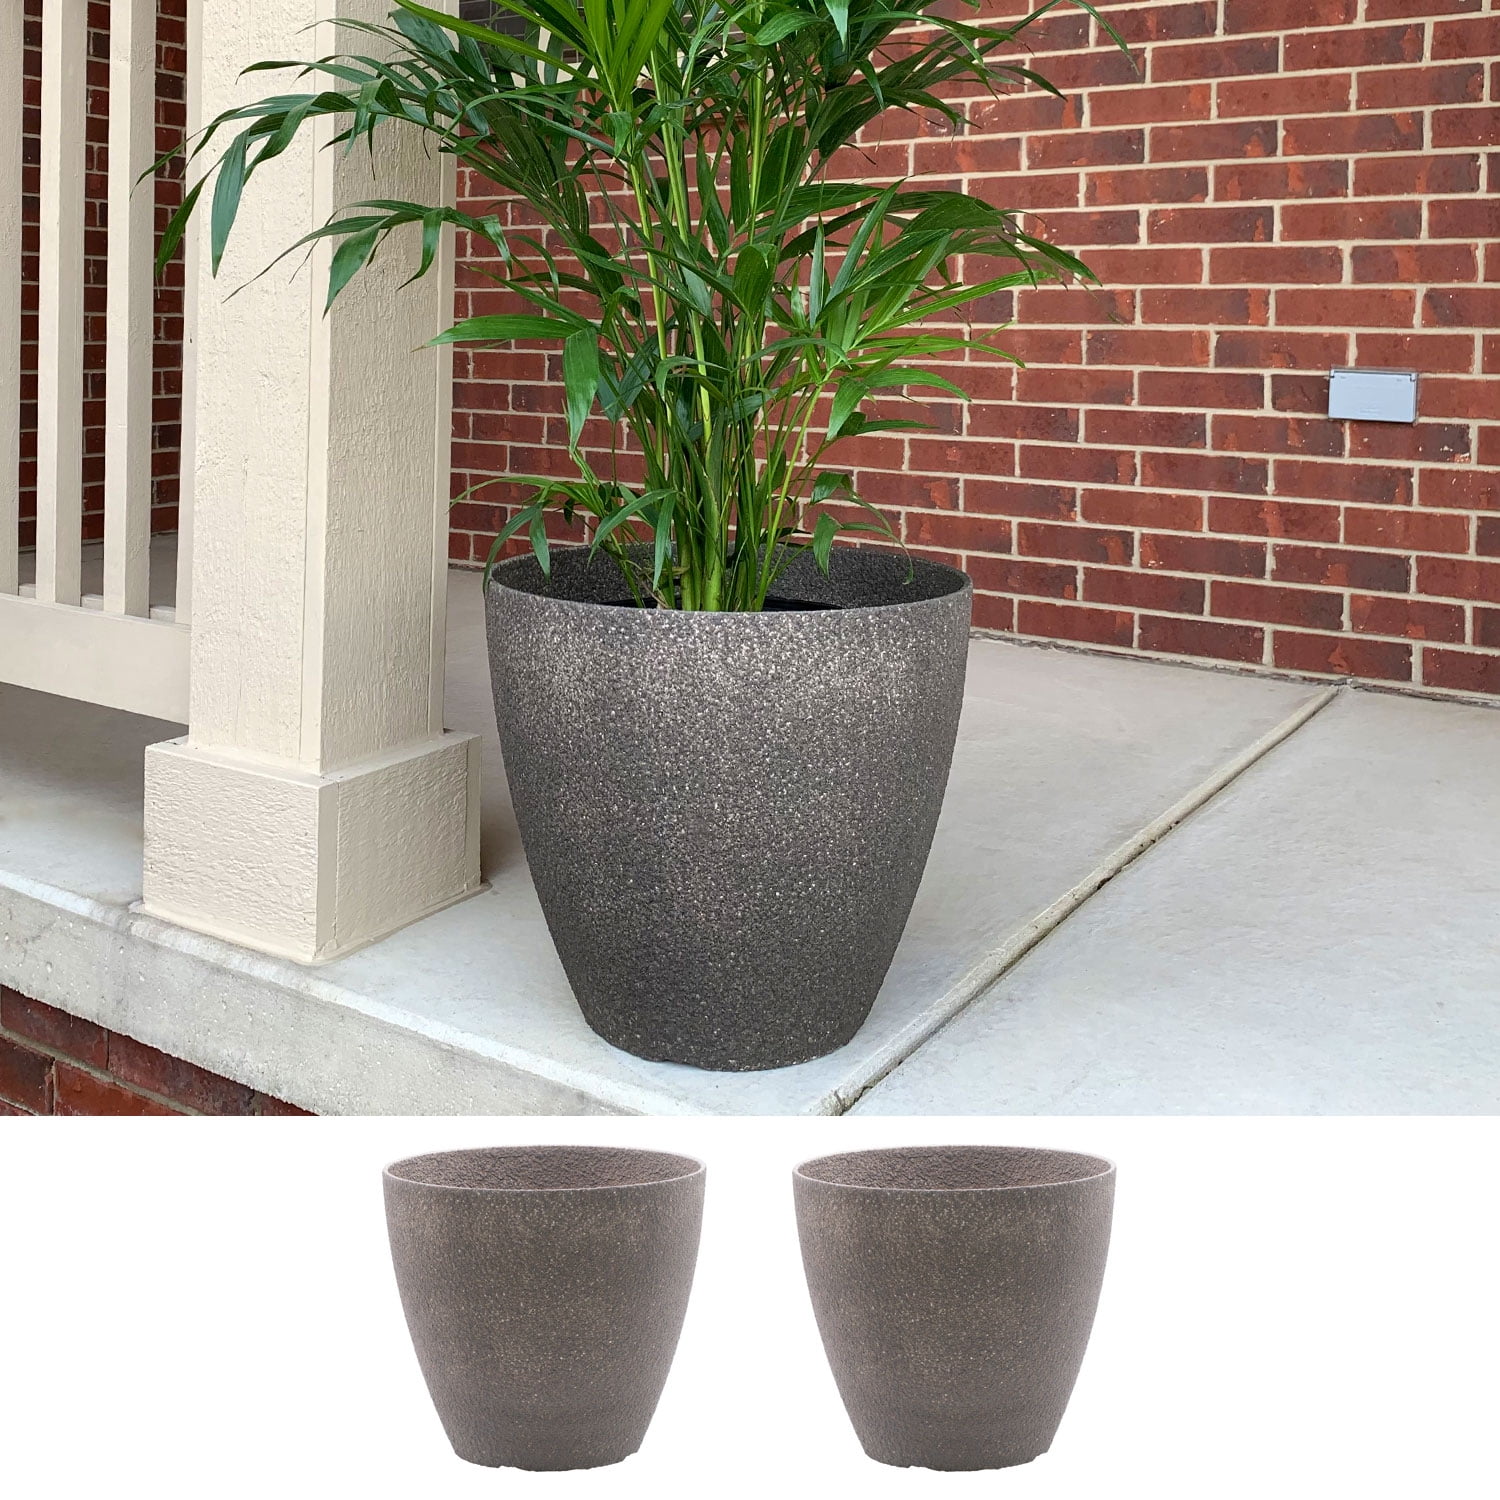 5.5in Ceramic Planter Large Planter Flower Pot Indoor and Outdoor Brown Set of 2 